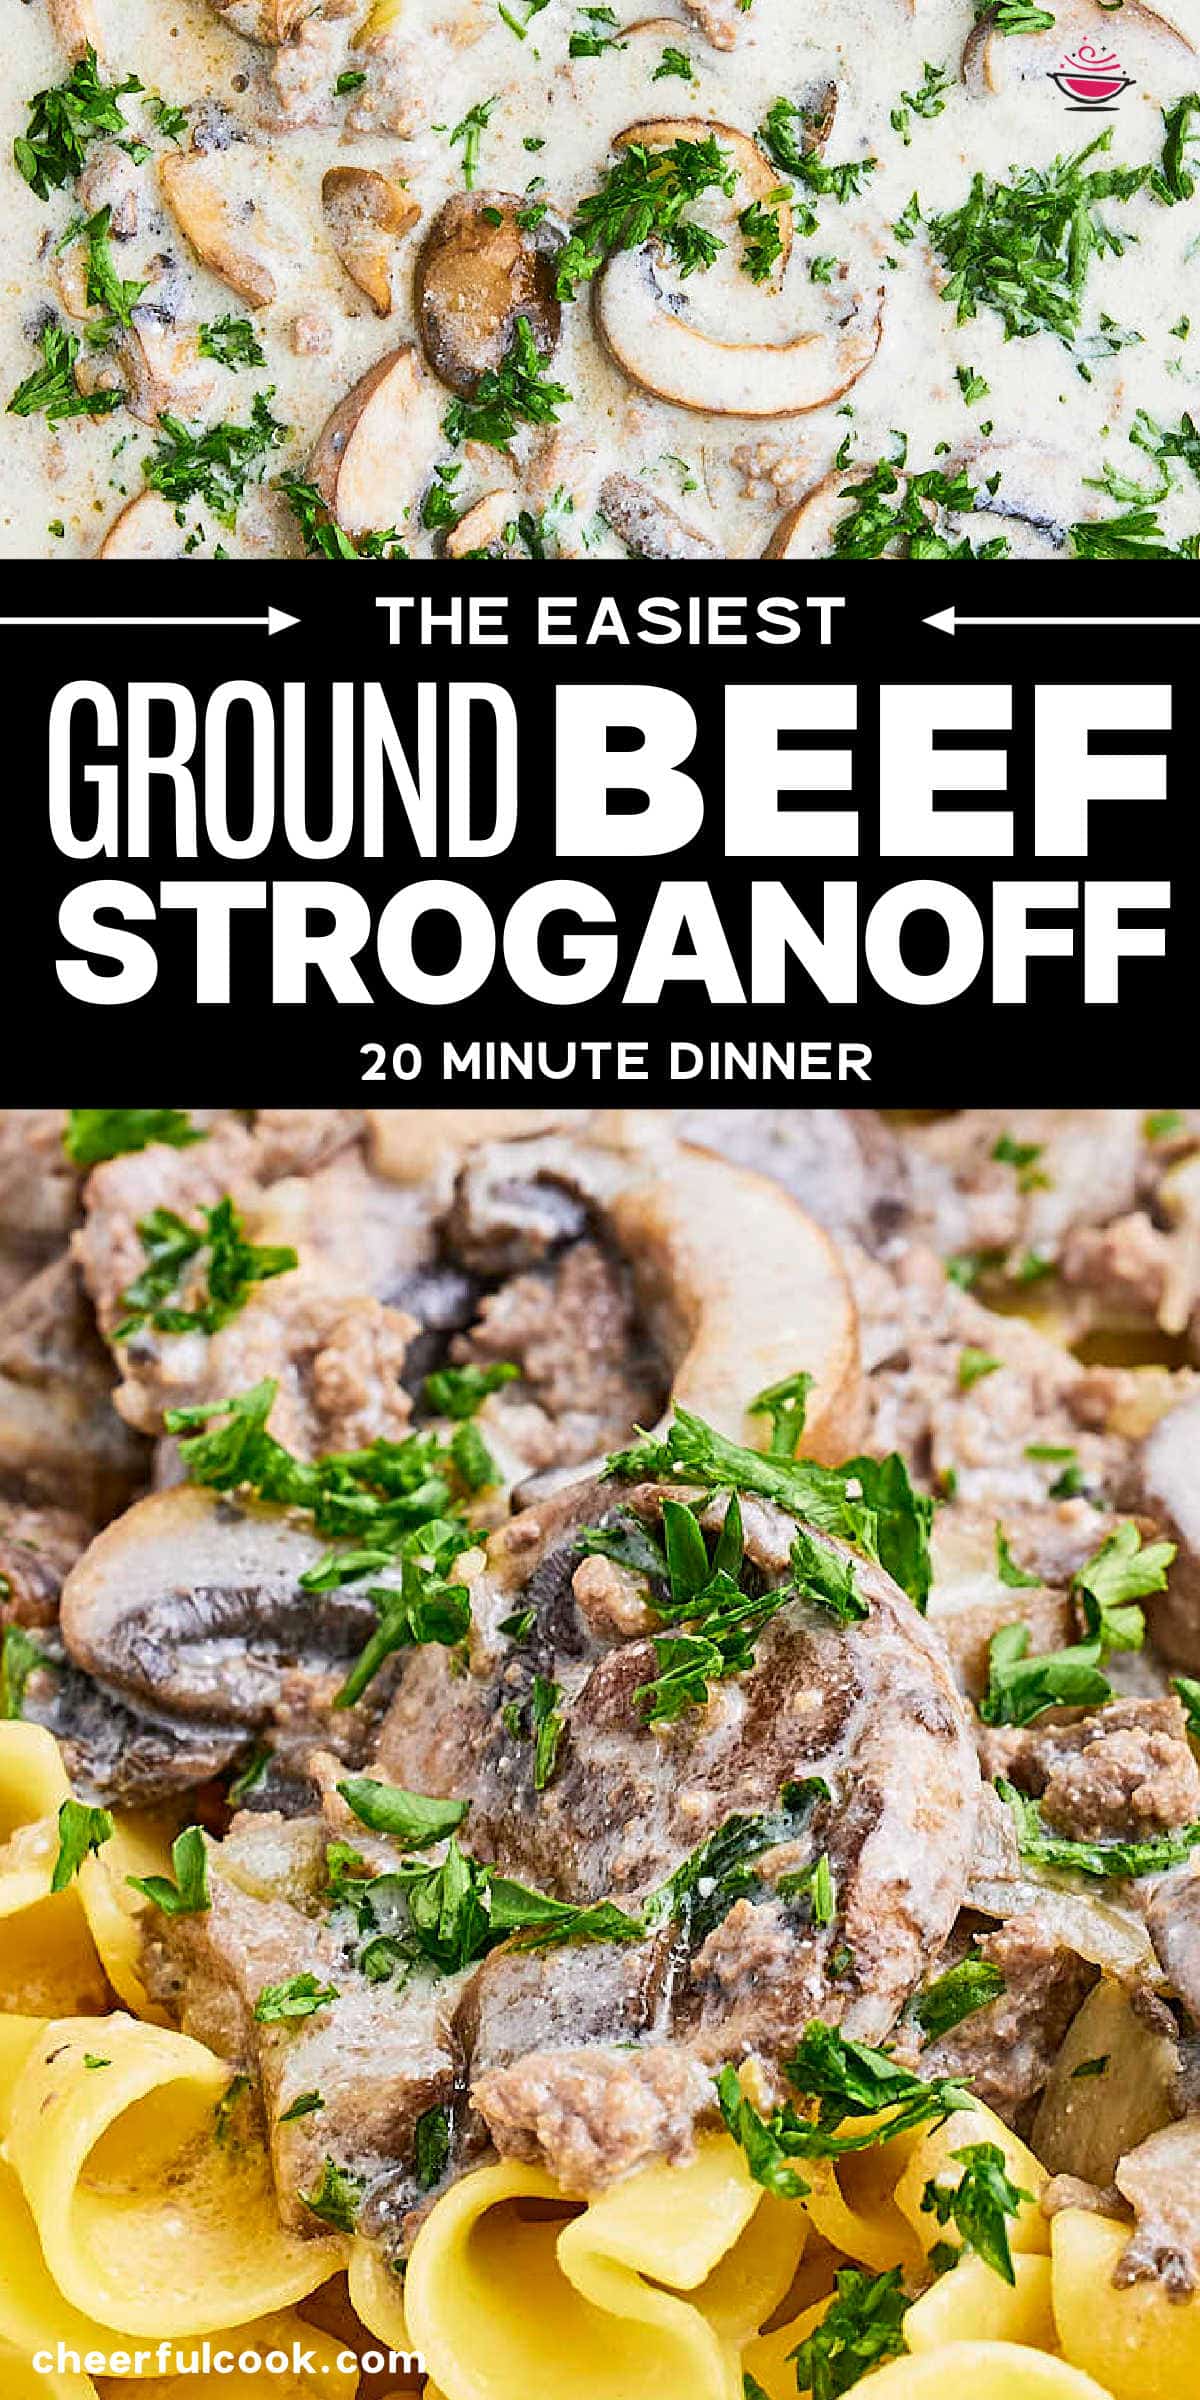 Mouthwatering ground beef, onions, and mushrooms are cooked in an irresistible cream of mushroom sauce perfected with mustard and sour cream. It's a perfect, easy, 20-minute comfort food recipe. #cheerfulcook #beefstroganoff #groundbeefstroganoff #hamburgerstroganoff #20minutedinner via @cheerfulcook